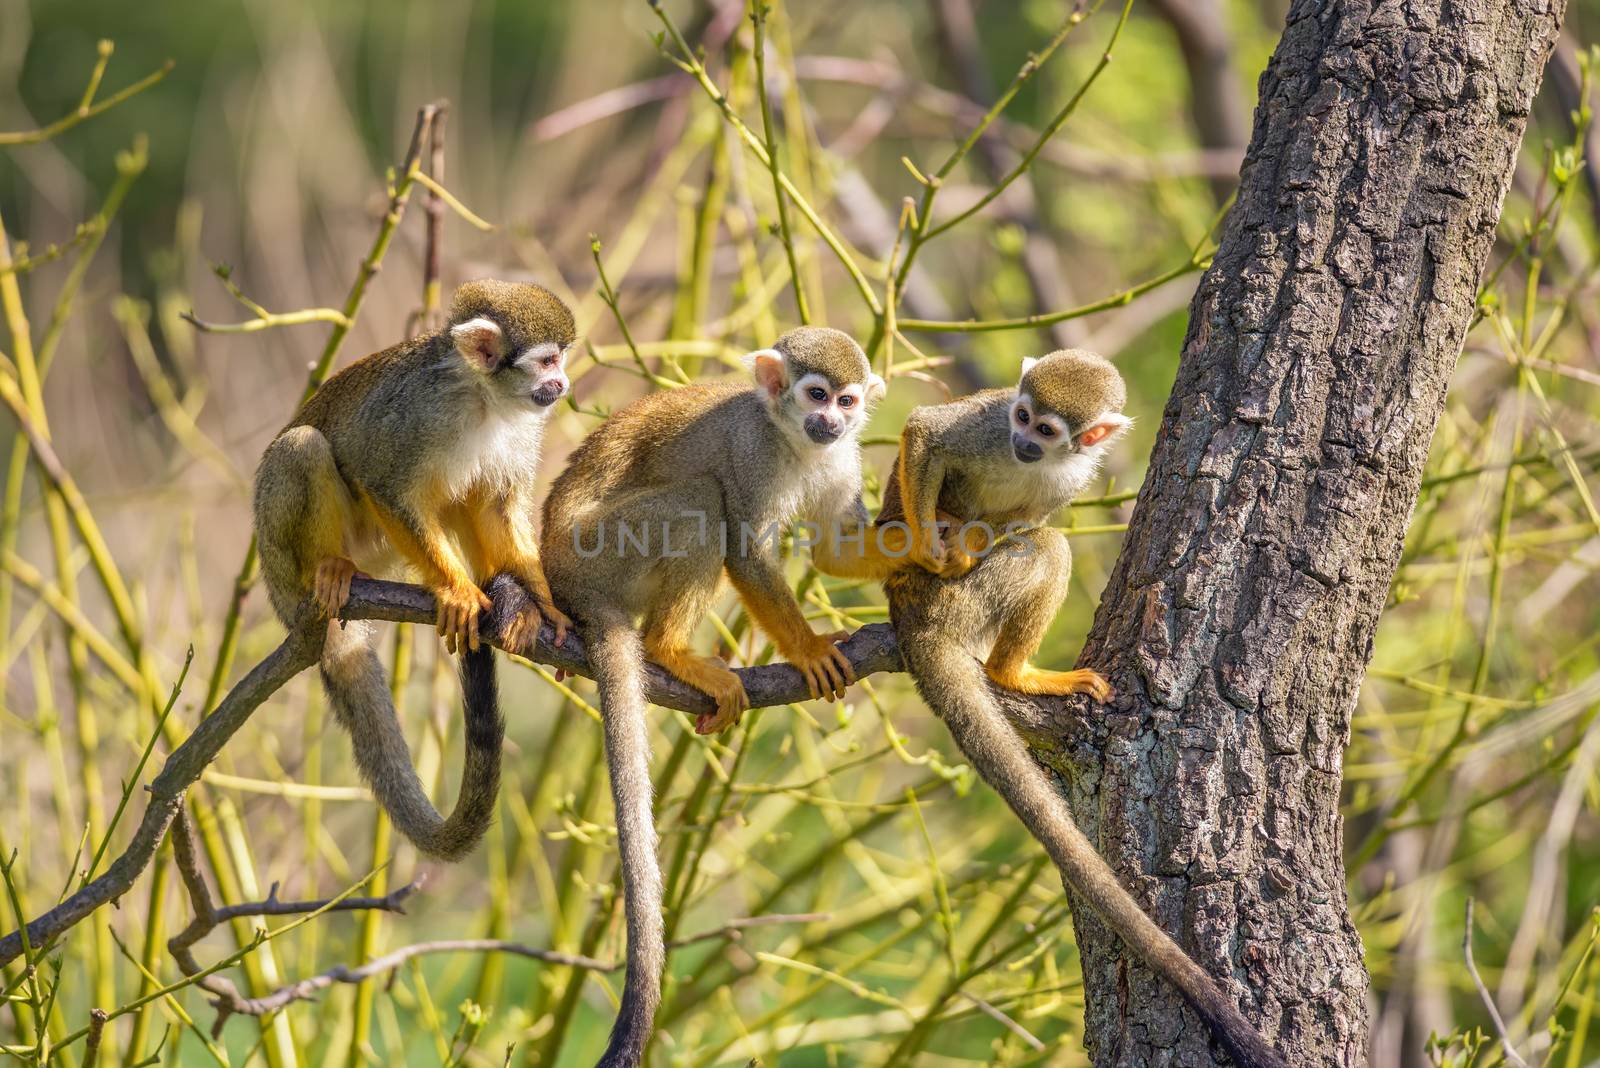 Common squirrel monkeys on a tree branch by nickfox